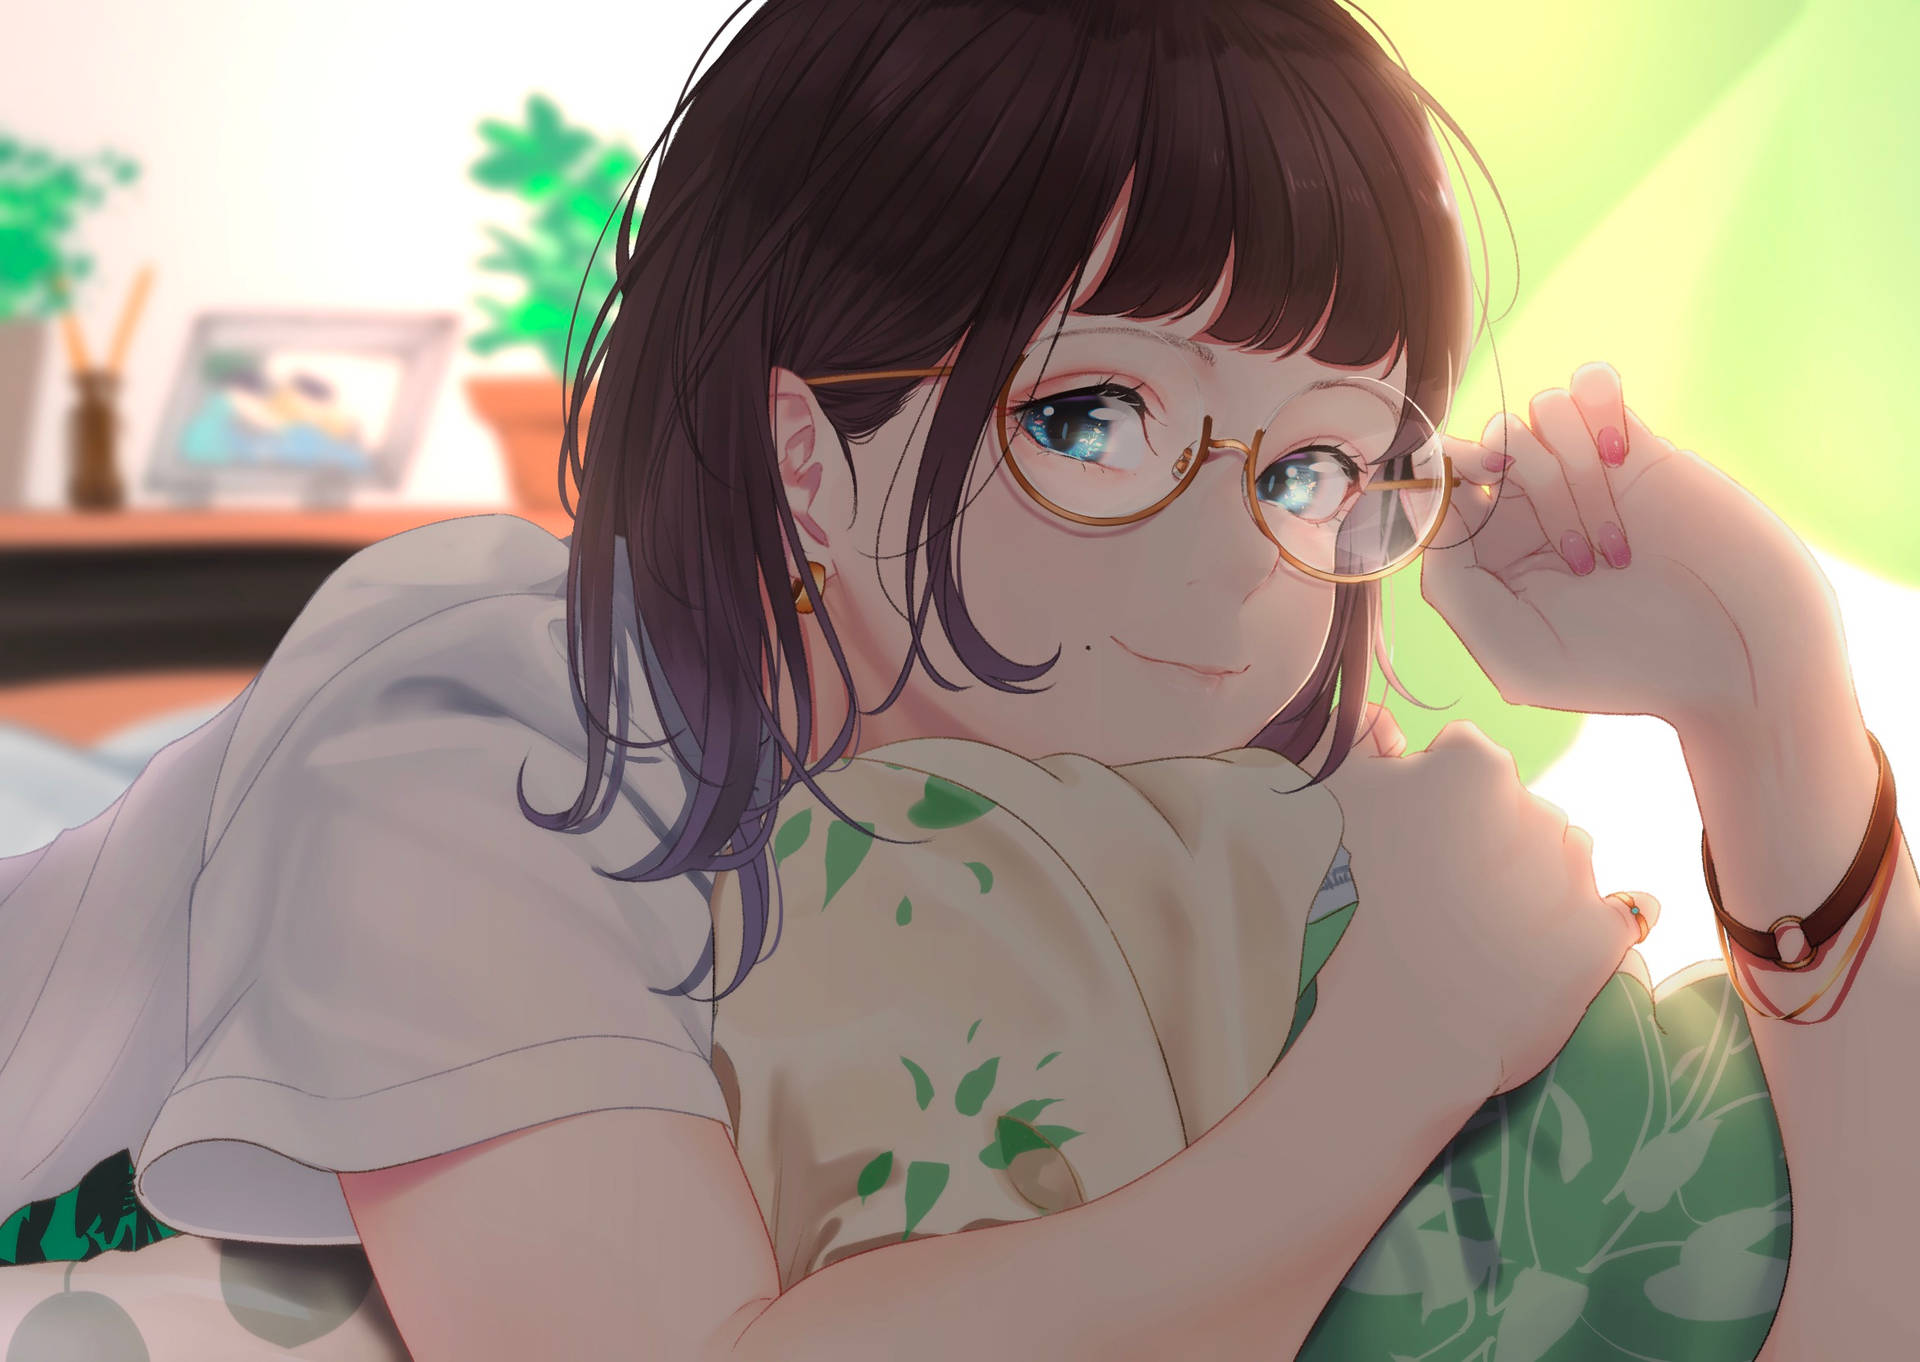 Anime Cute Girl With Eyeglasses Background